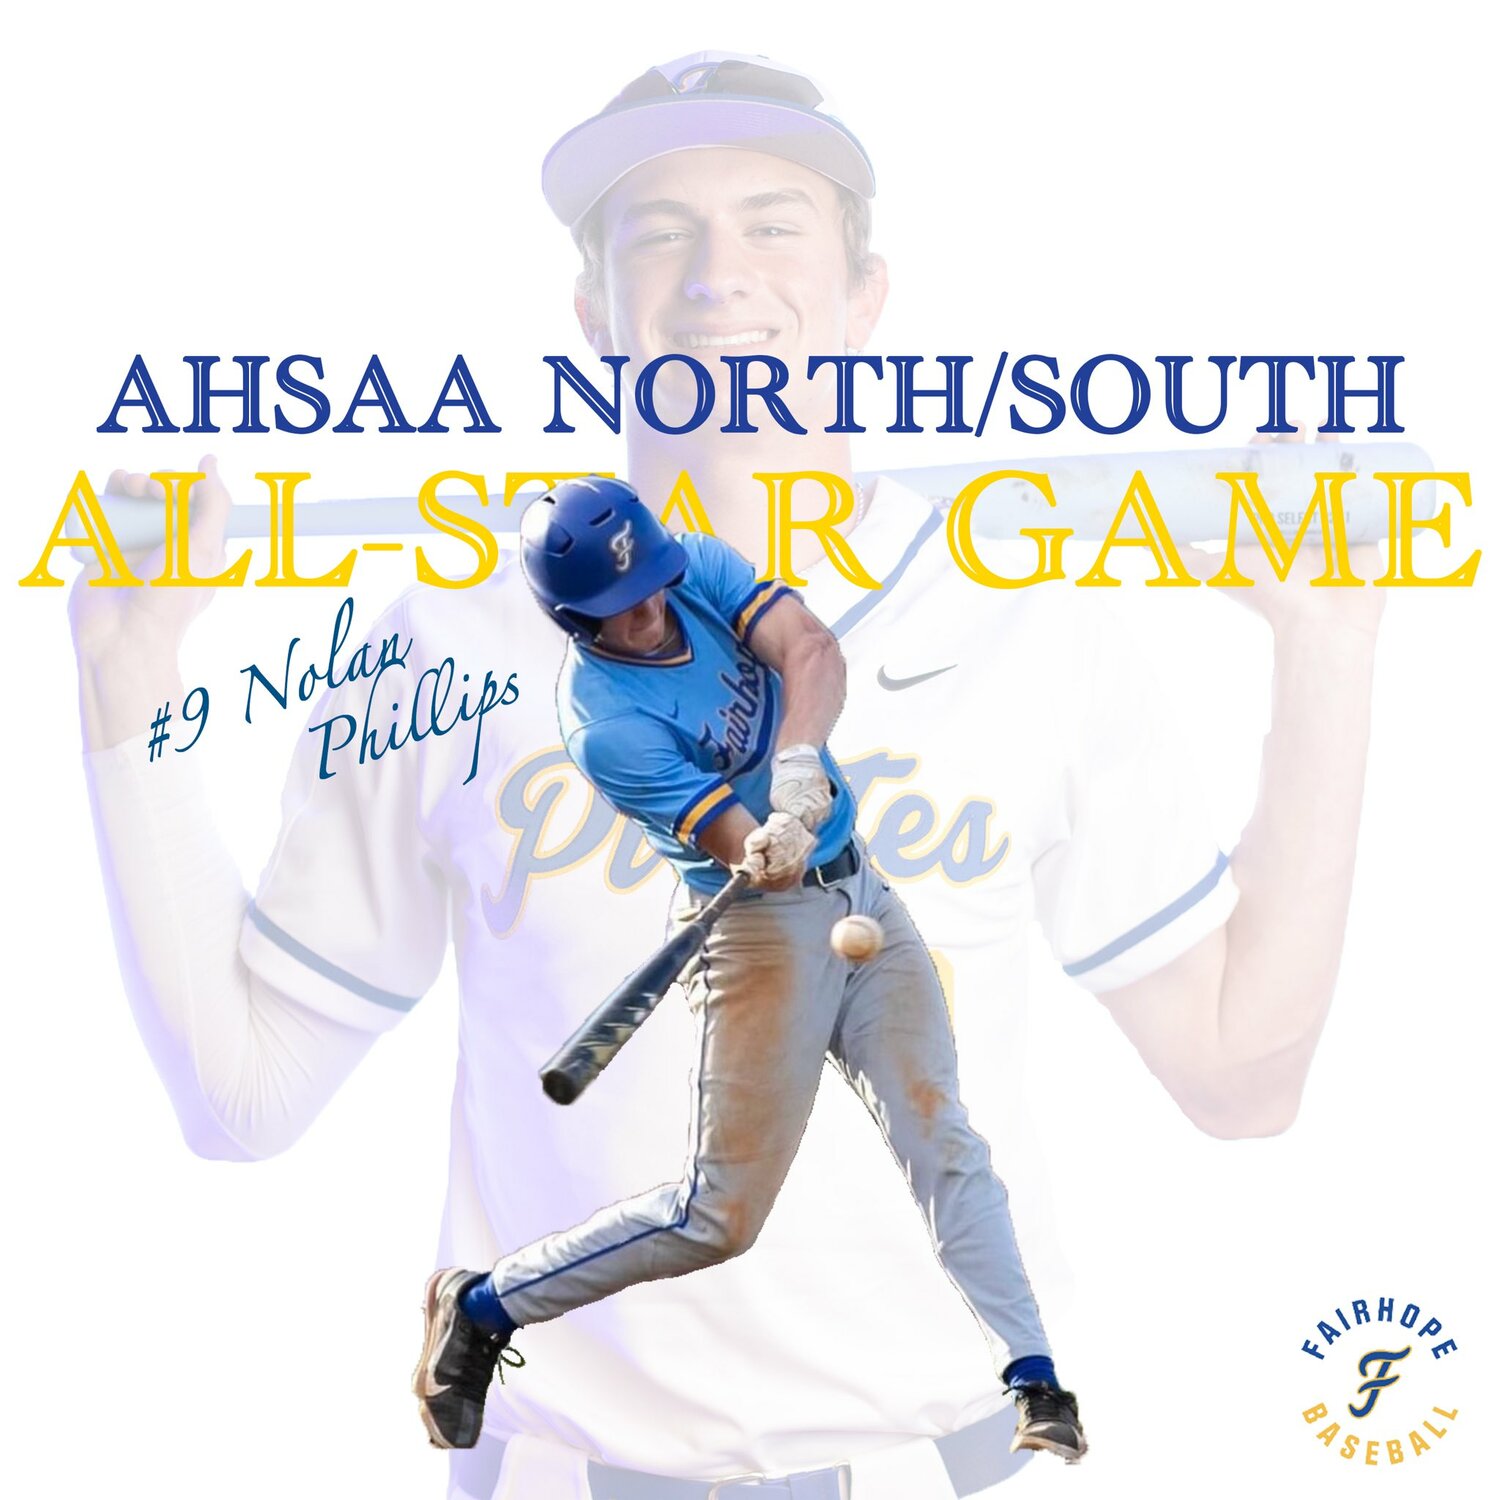 Fairhope junior Nolan Phillips was among three Baldwin County baseball players named to the South All-Star roster Monday. The outfielder will represent the Pirates July 17 at Riverwalk Stadium in Montgomery as part of the AHSAA All-Star Week.